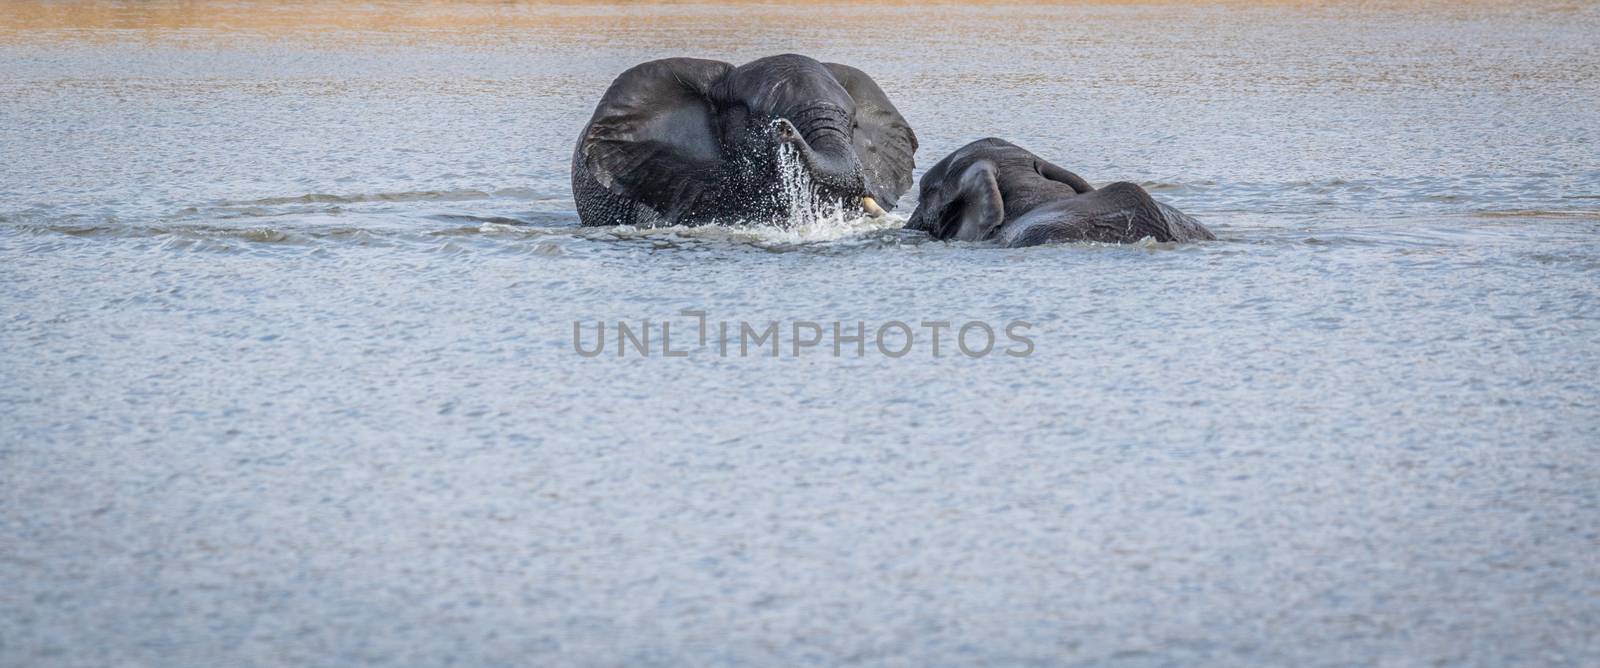 Two Elephants playing in the water in the Kruger National Park, South Africa.